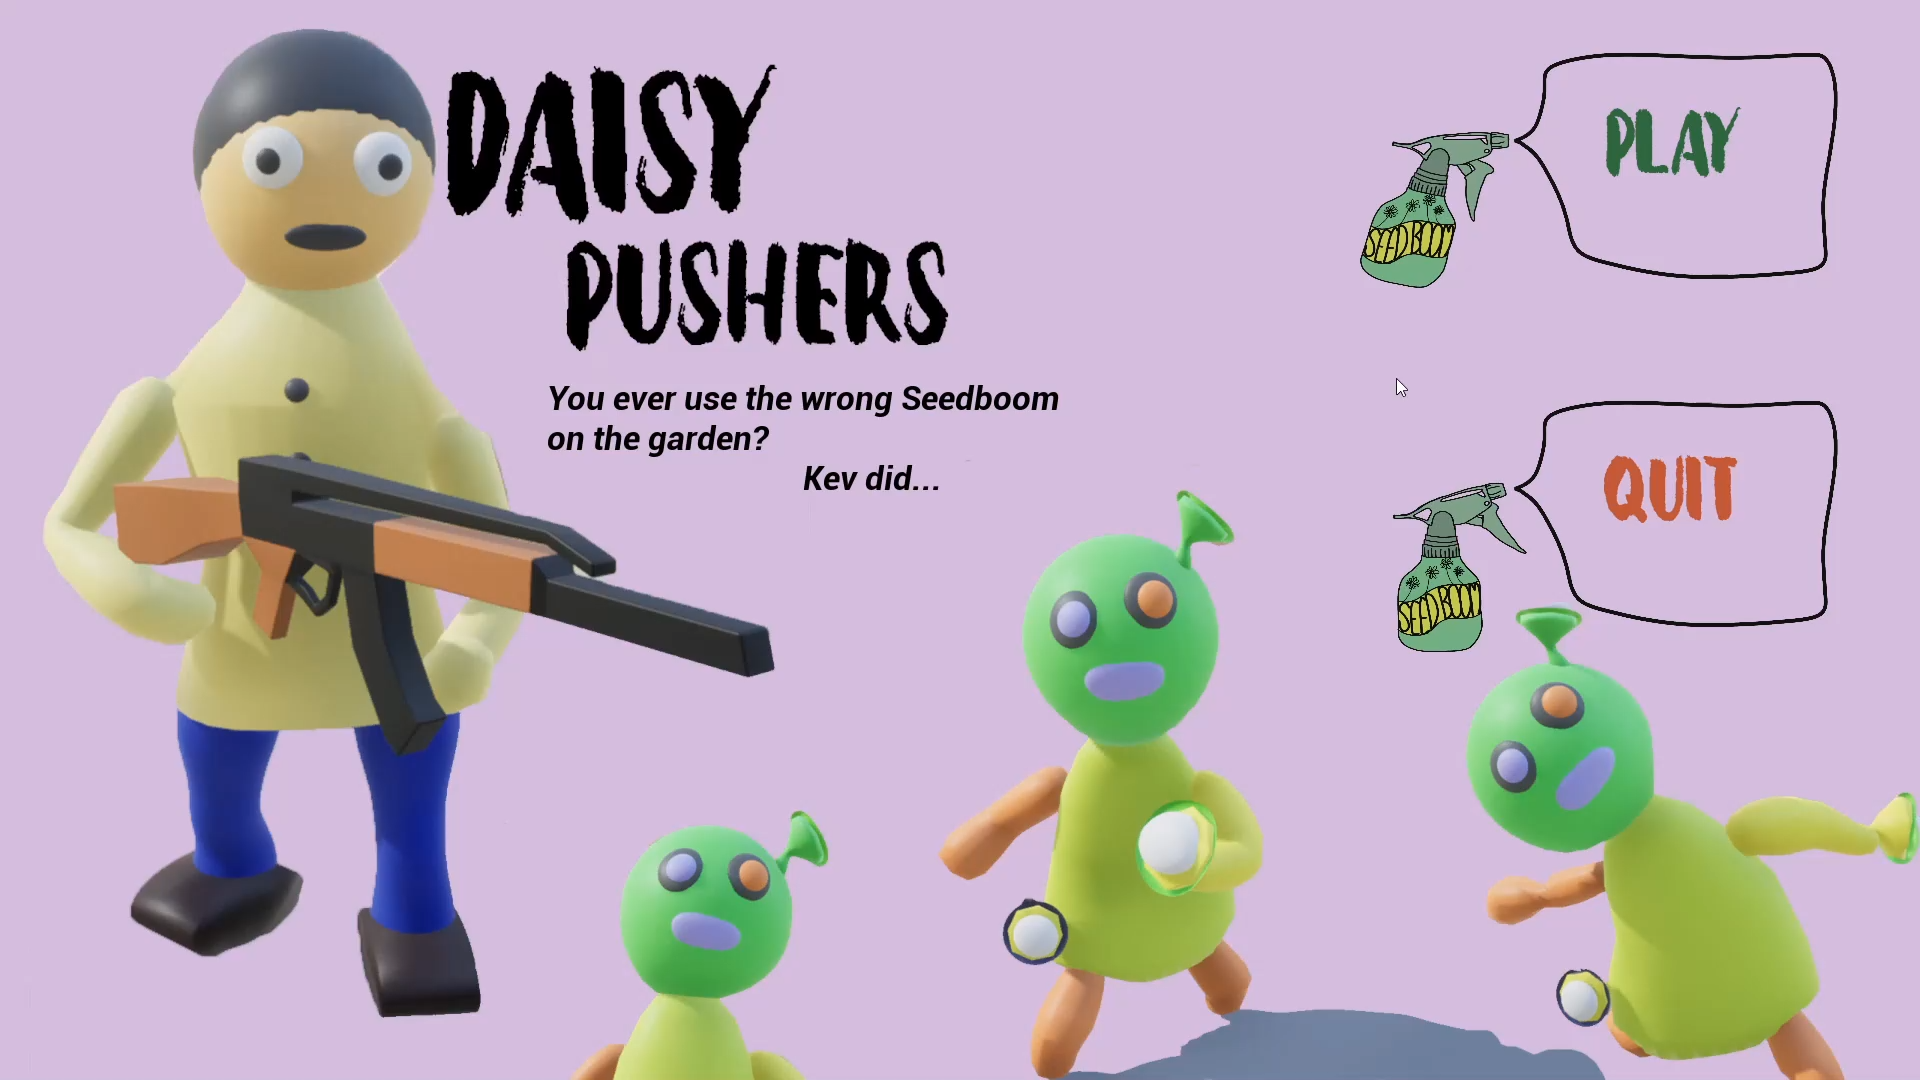 BA Games work by Emma Chipperfield showing a gameplay video for Daisy Pushers